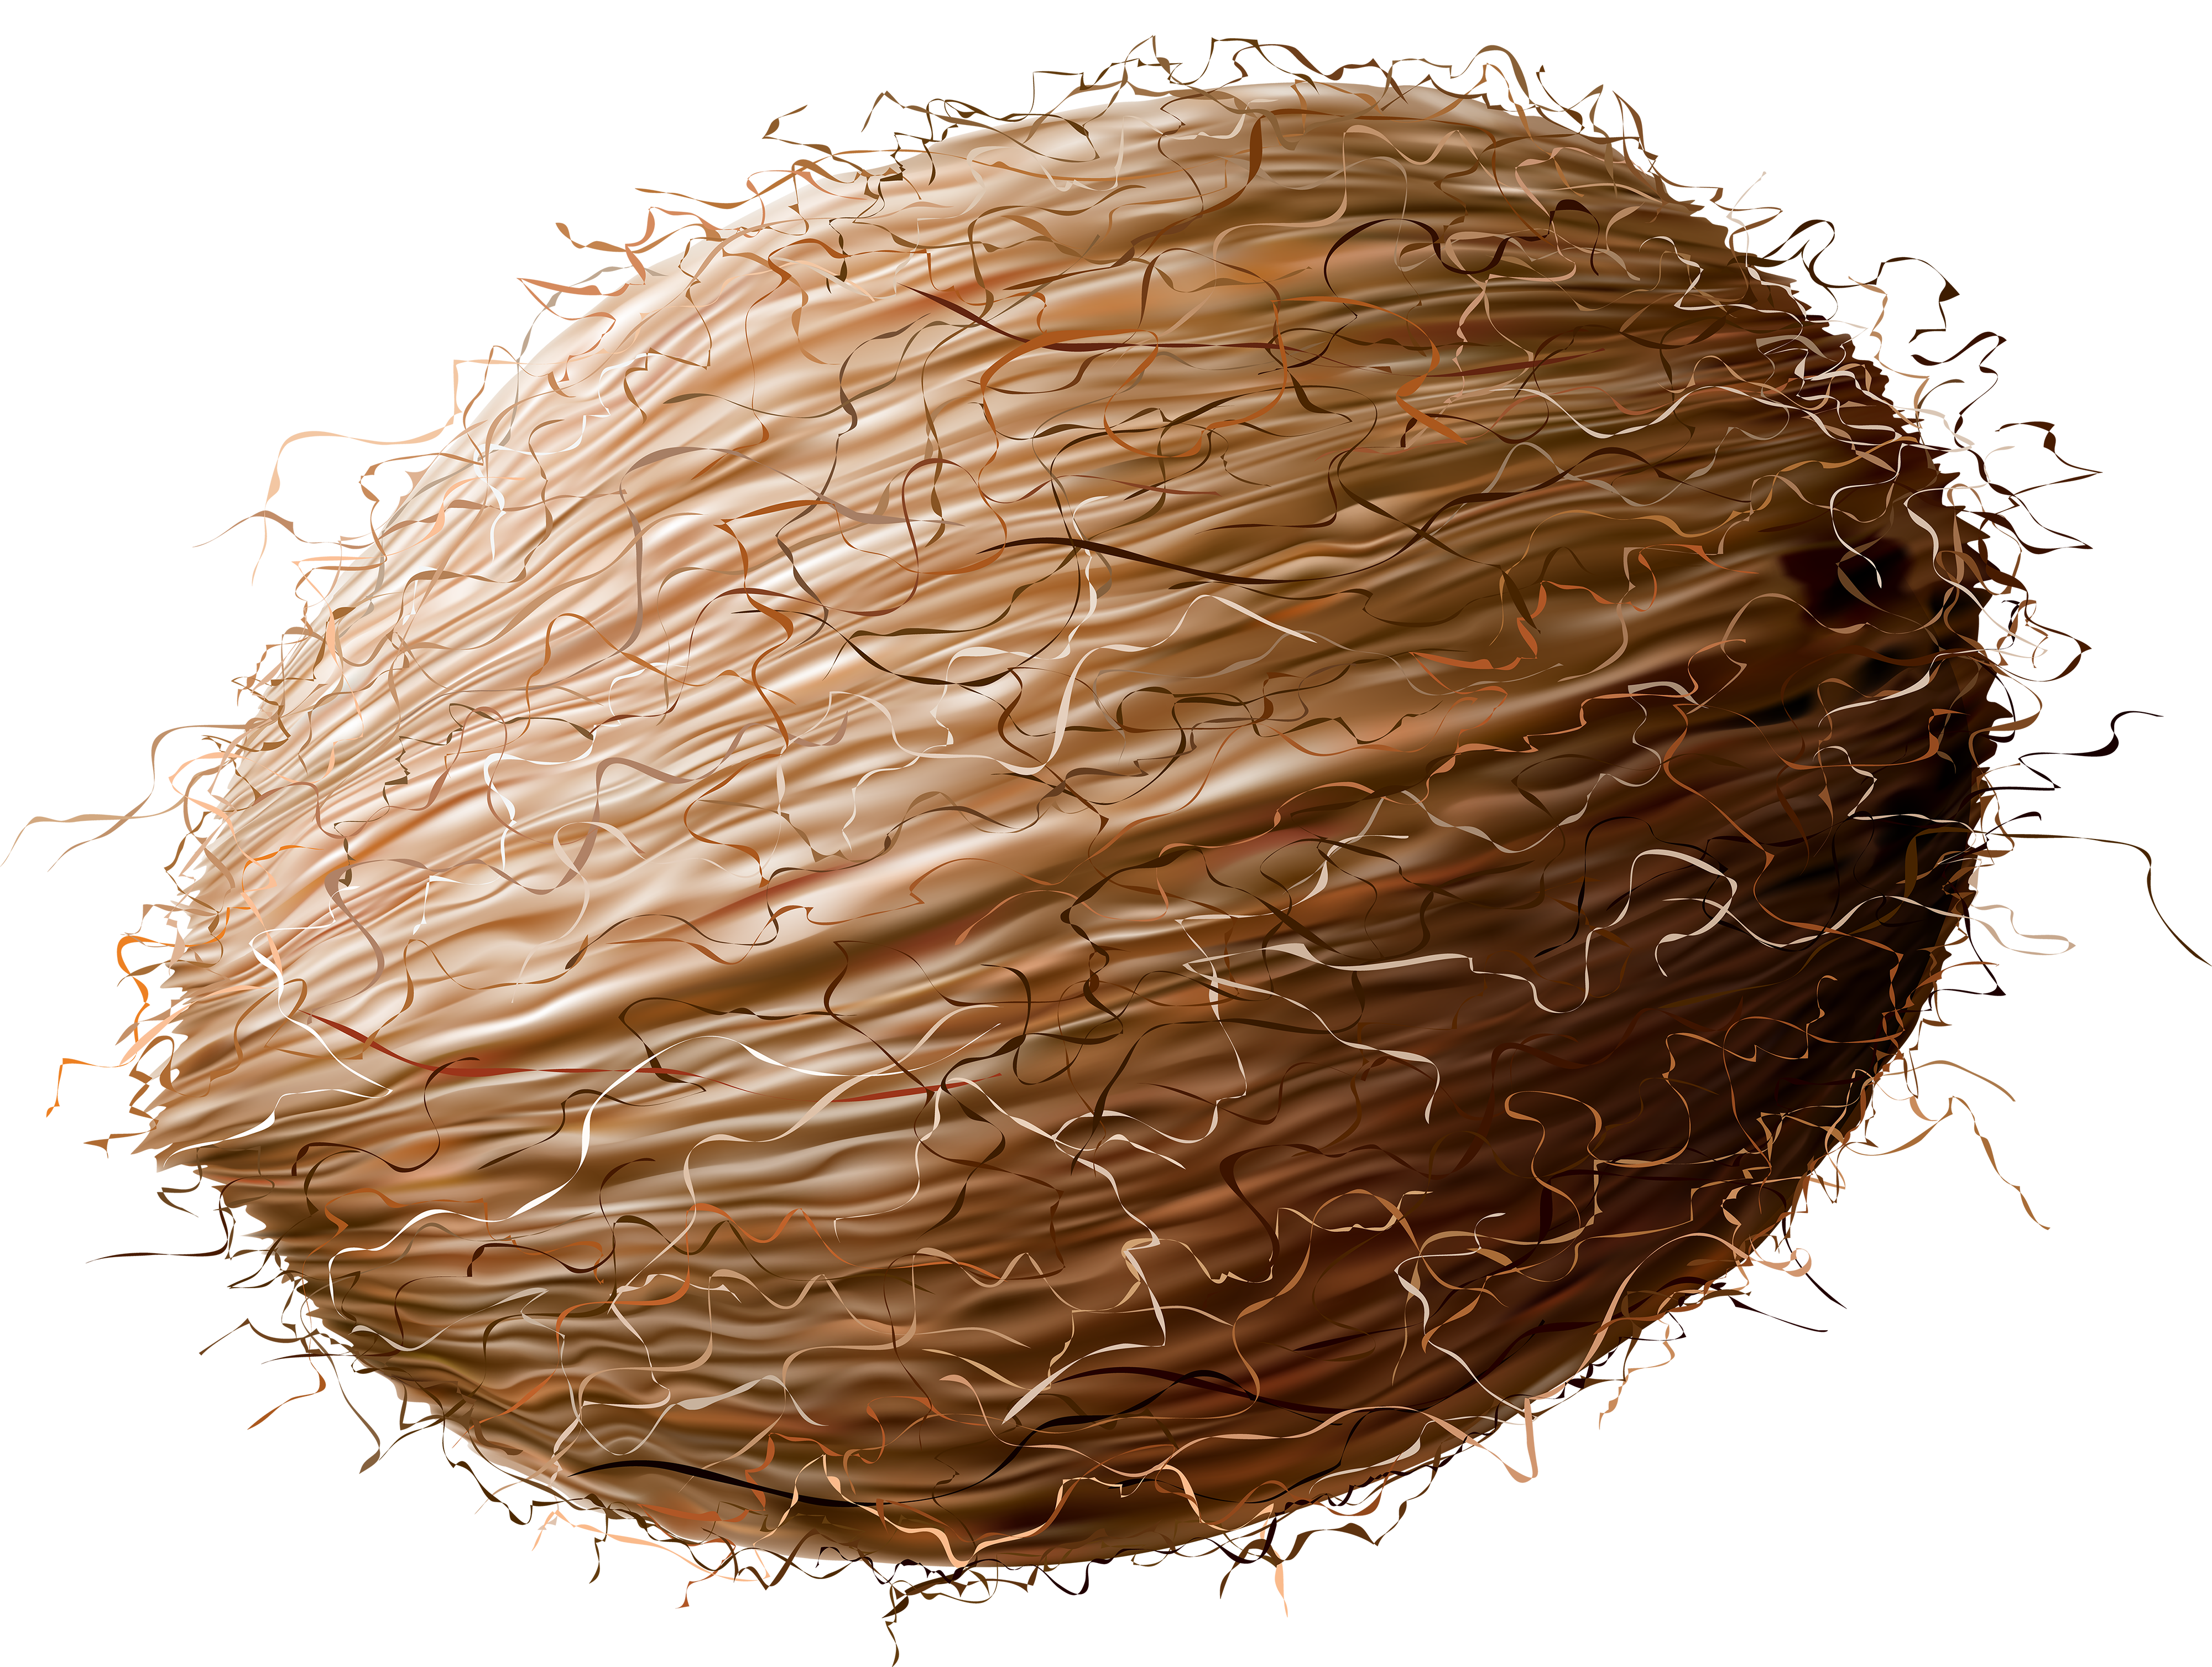 coconut png